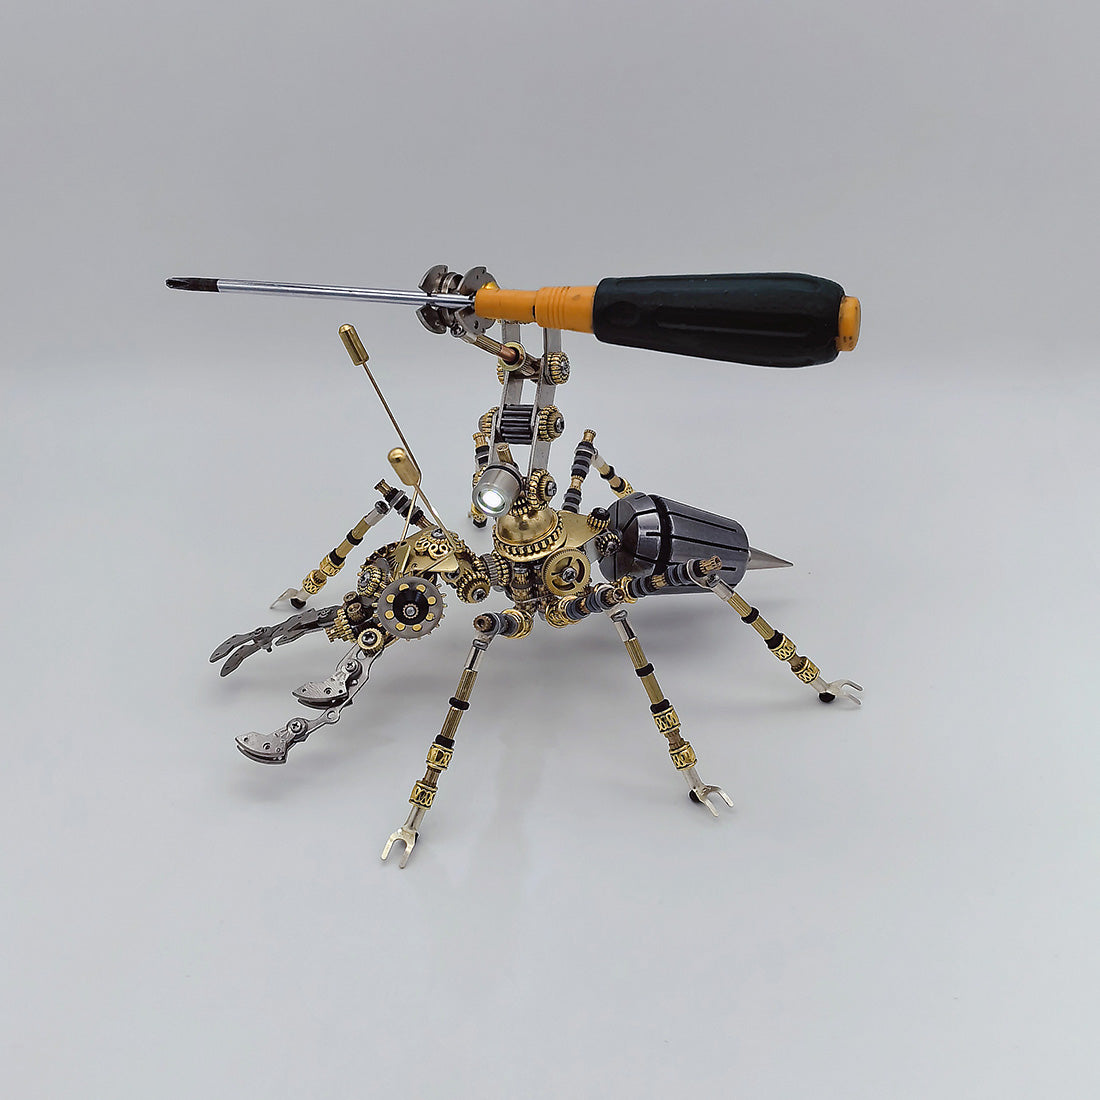 3D Metal Puzzle Worker Ant Steampunk Insect DIY Assembly Model 400+PCS